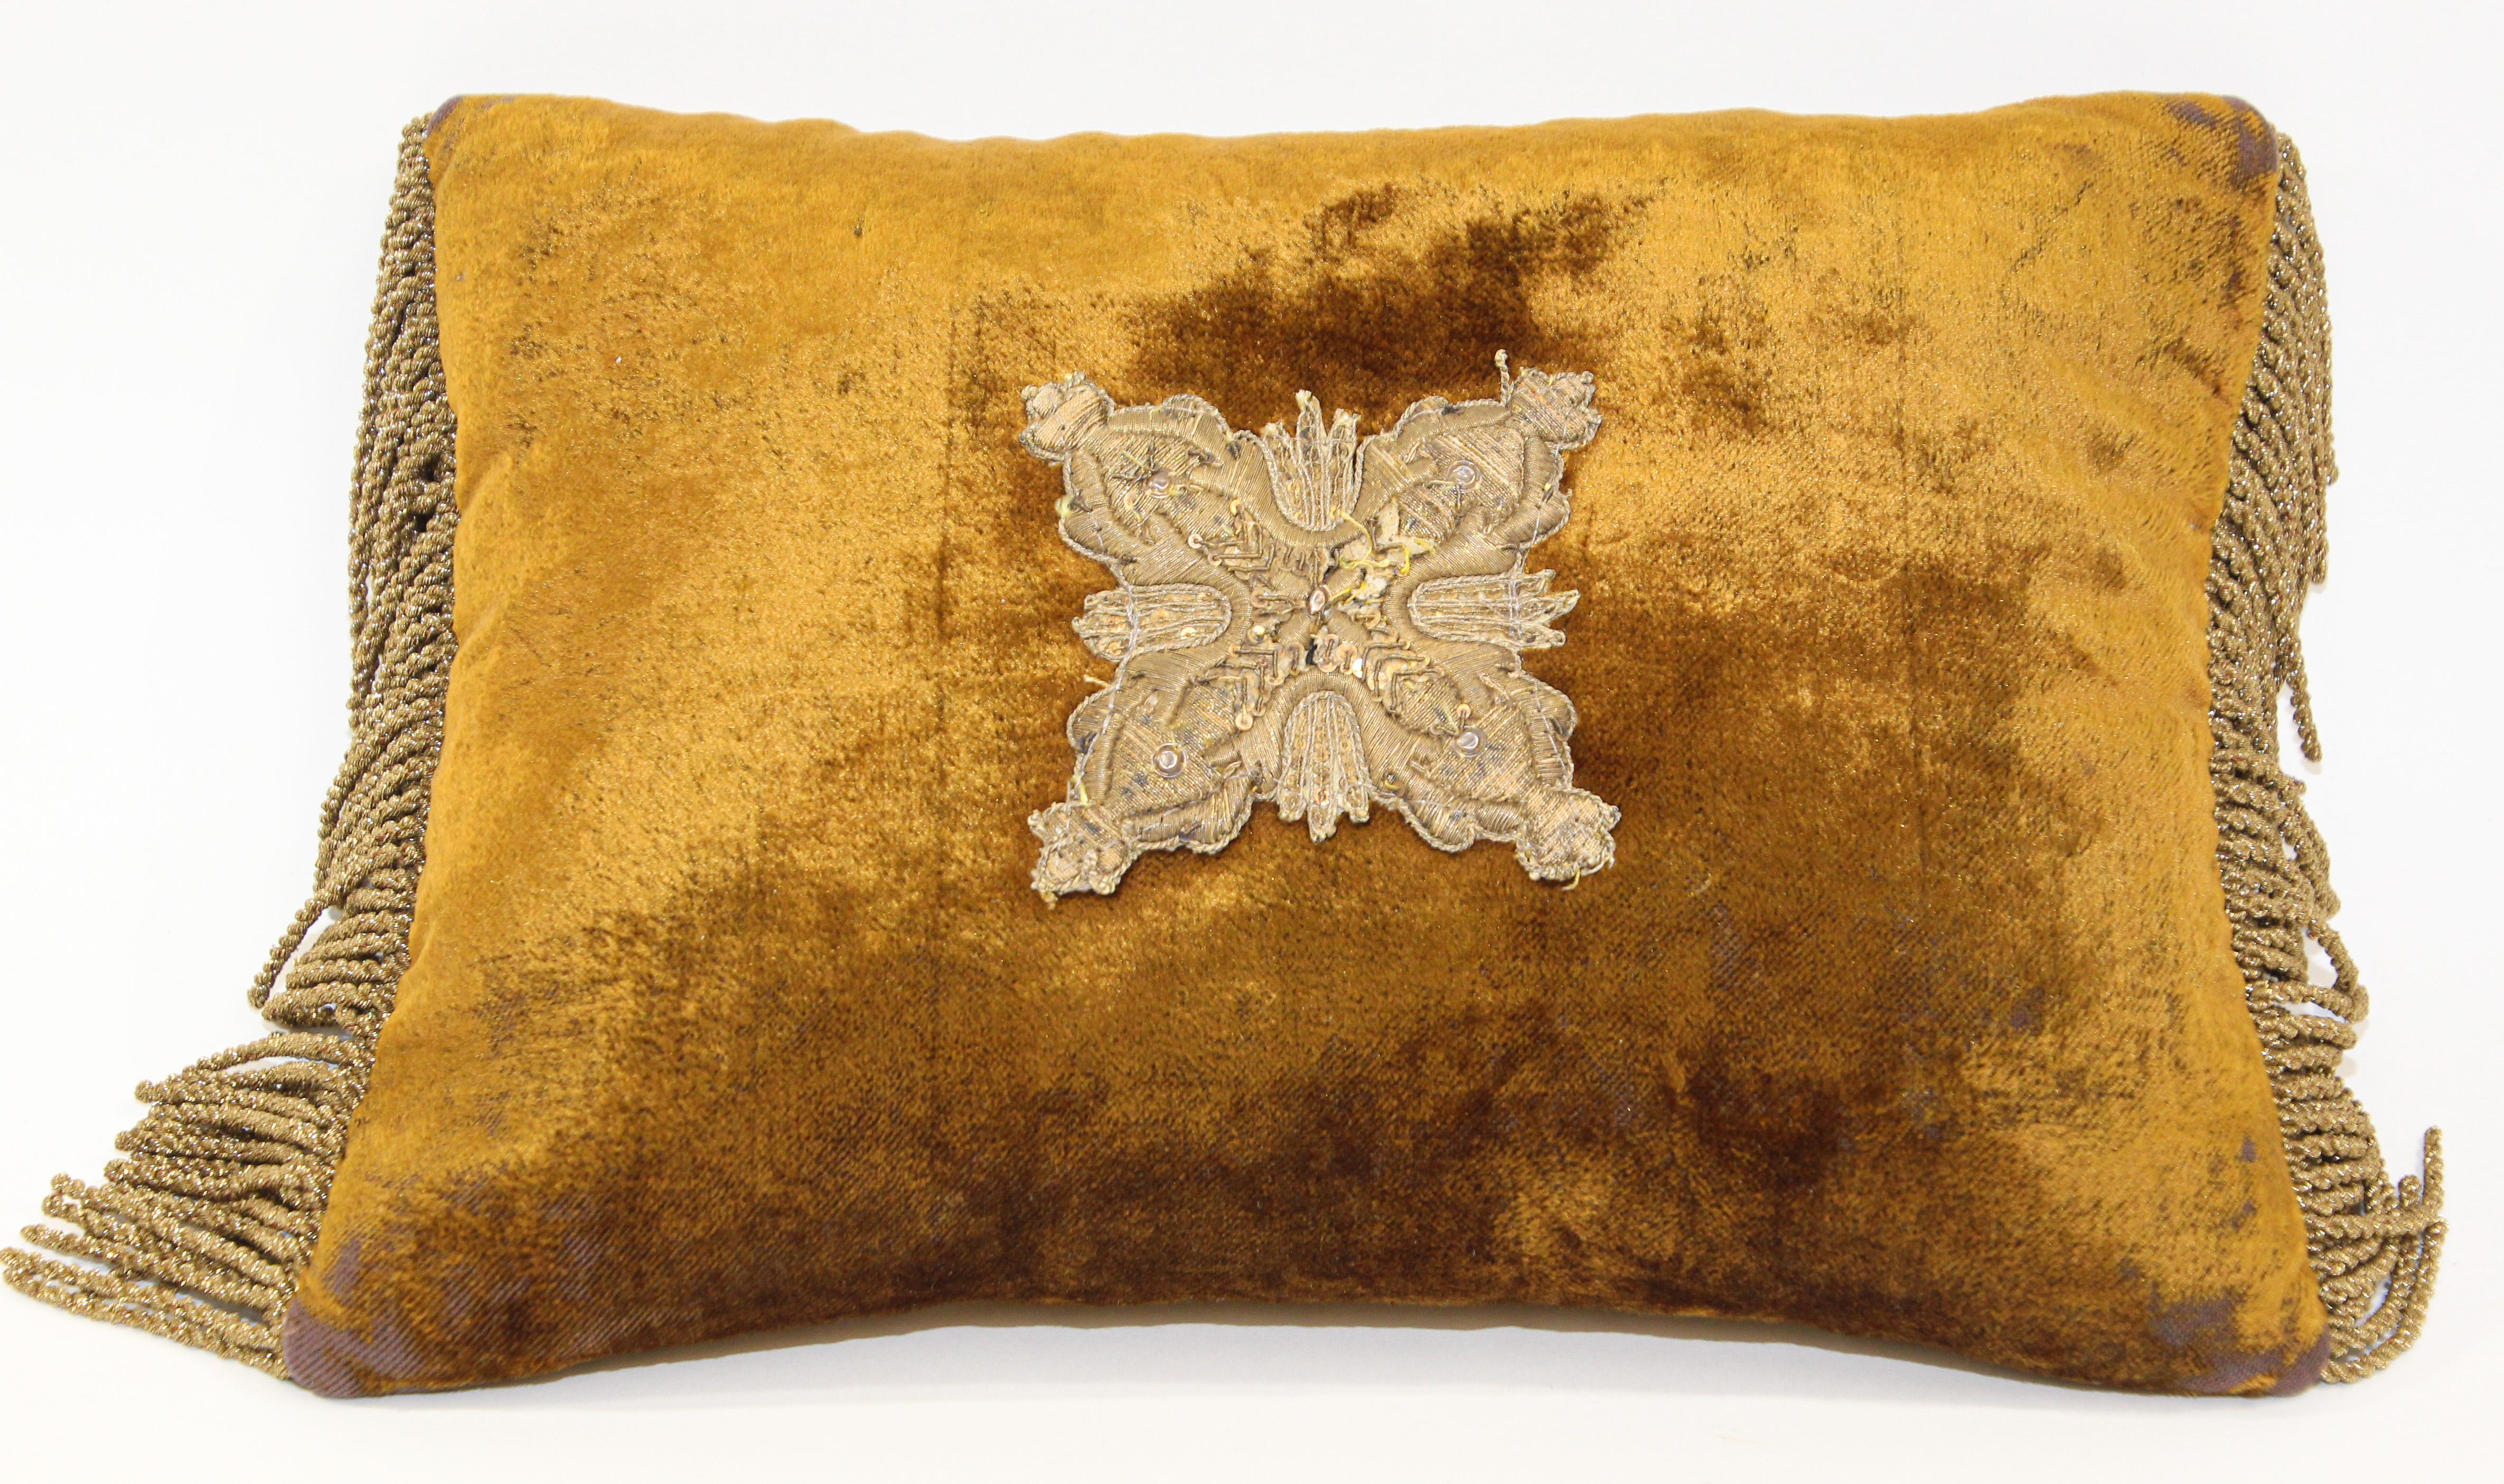 Gold brown silk velvet pillow hand embroidered with gold threads.
Handcrafted luxury throw pillow Dupioni silk backed.
Small delicate and elegant hand-made silk pillow embroidered with gold wire metallic thread applique in the center.
Raised gold